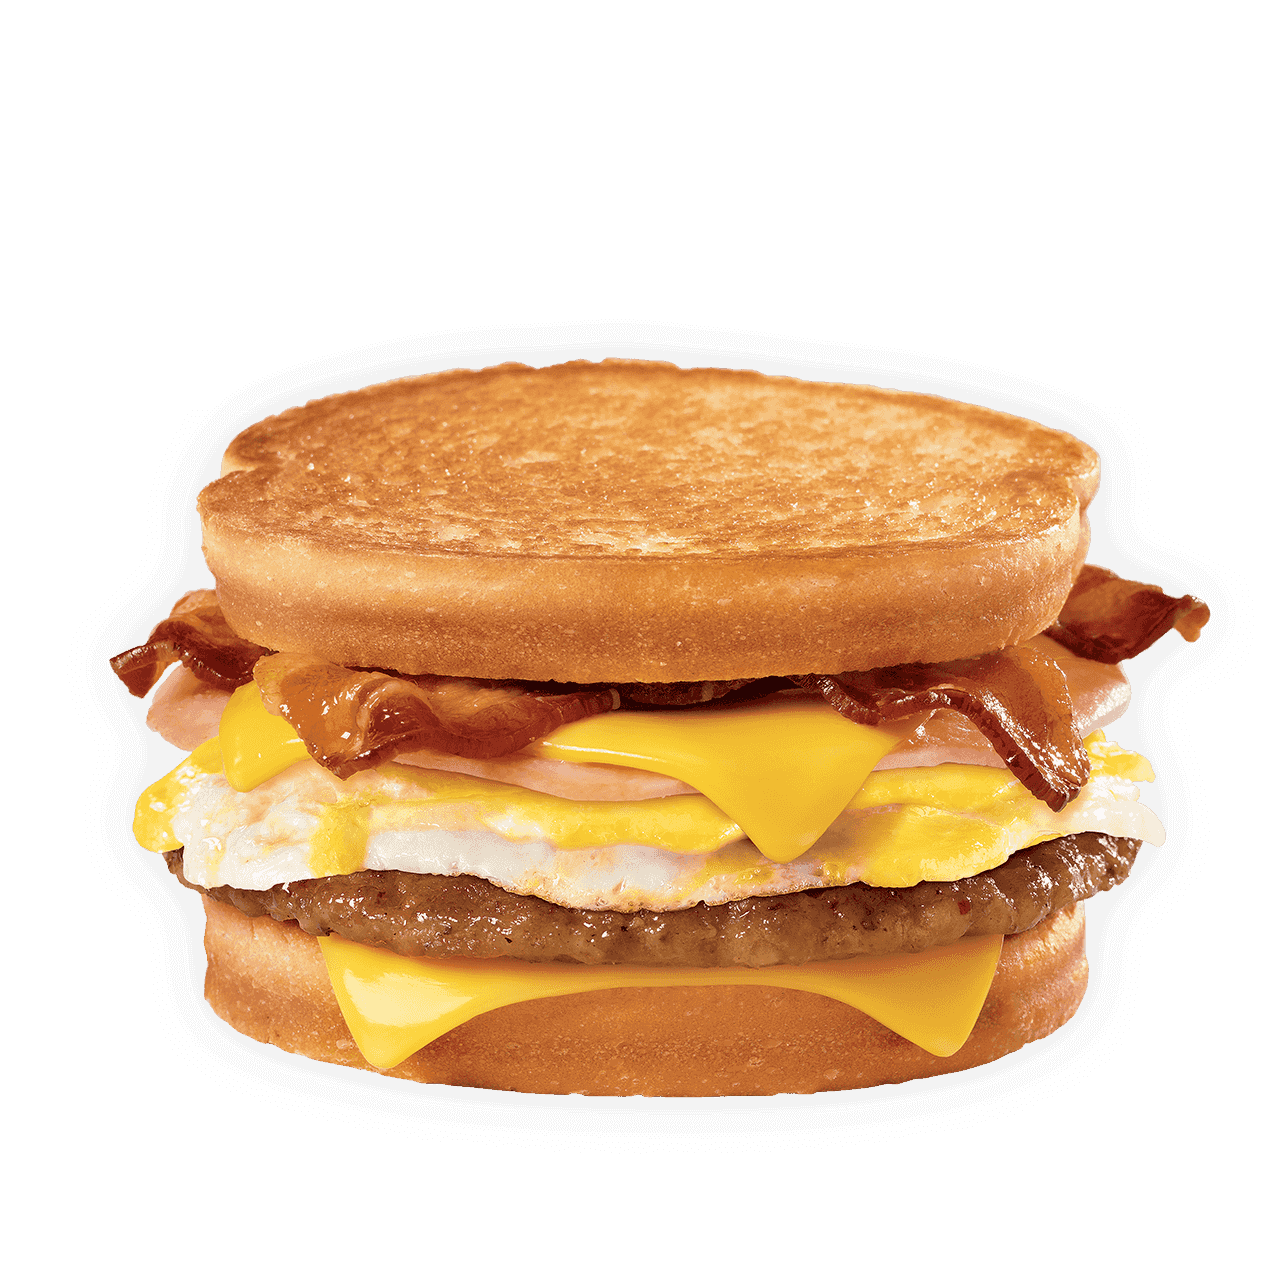 15 Meals At Jack In The Box For 500 Calories Or Less | Sausage Breakfast Jack | FastFoodMenuPrices.com